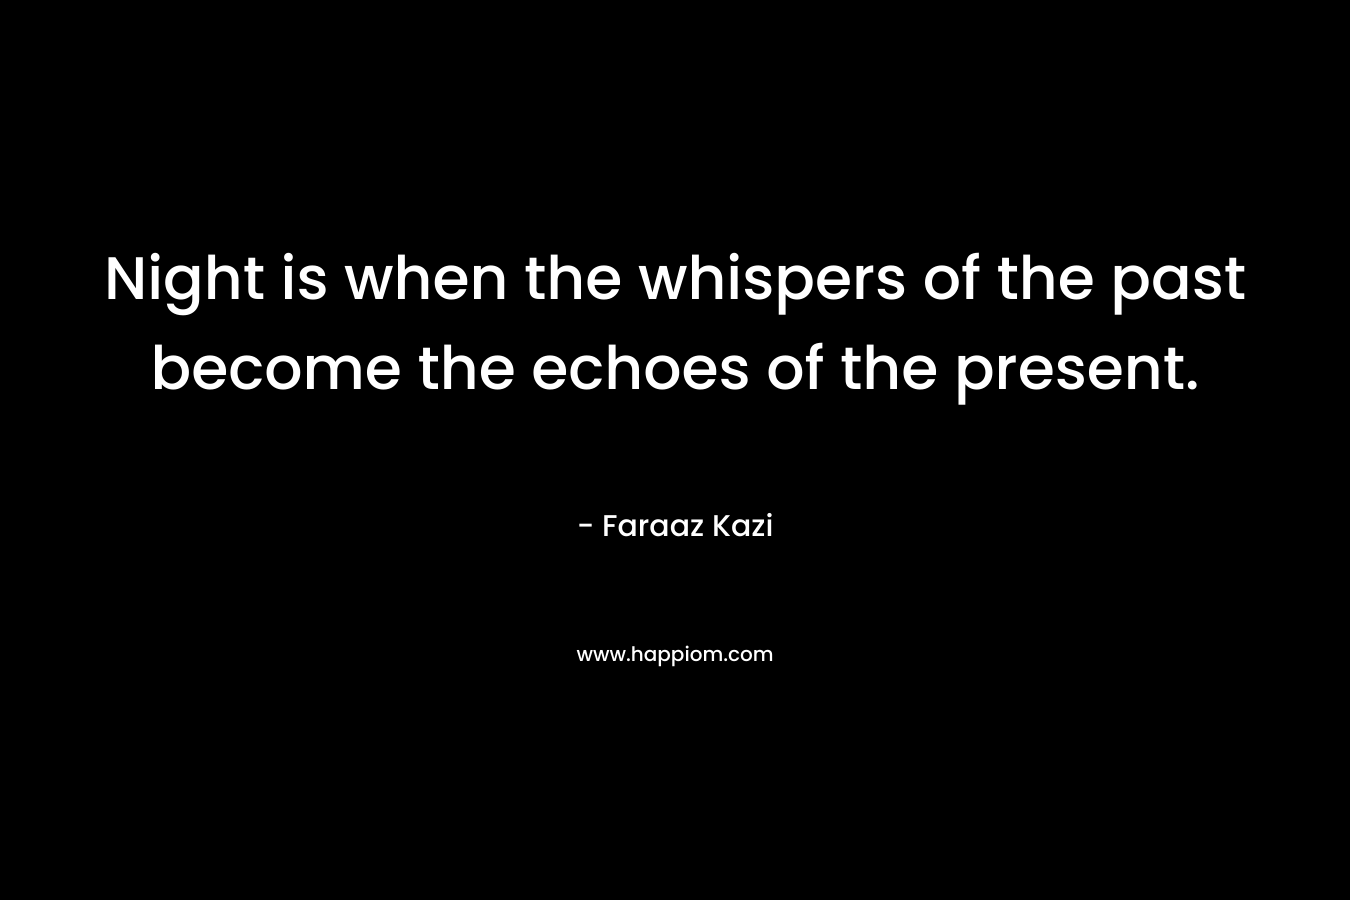 Night is when the whispers of the past become the echoes of the present.